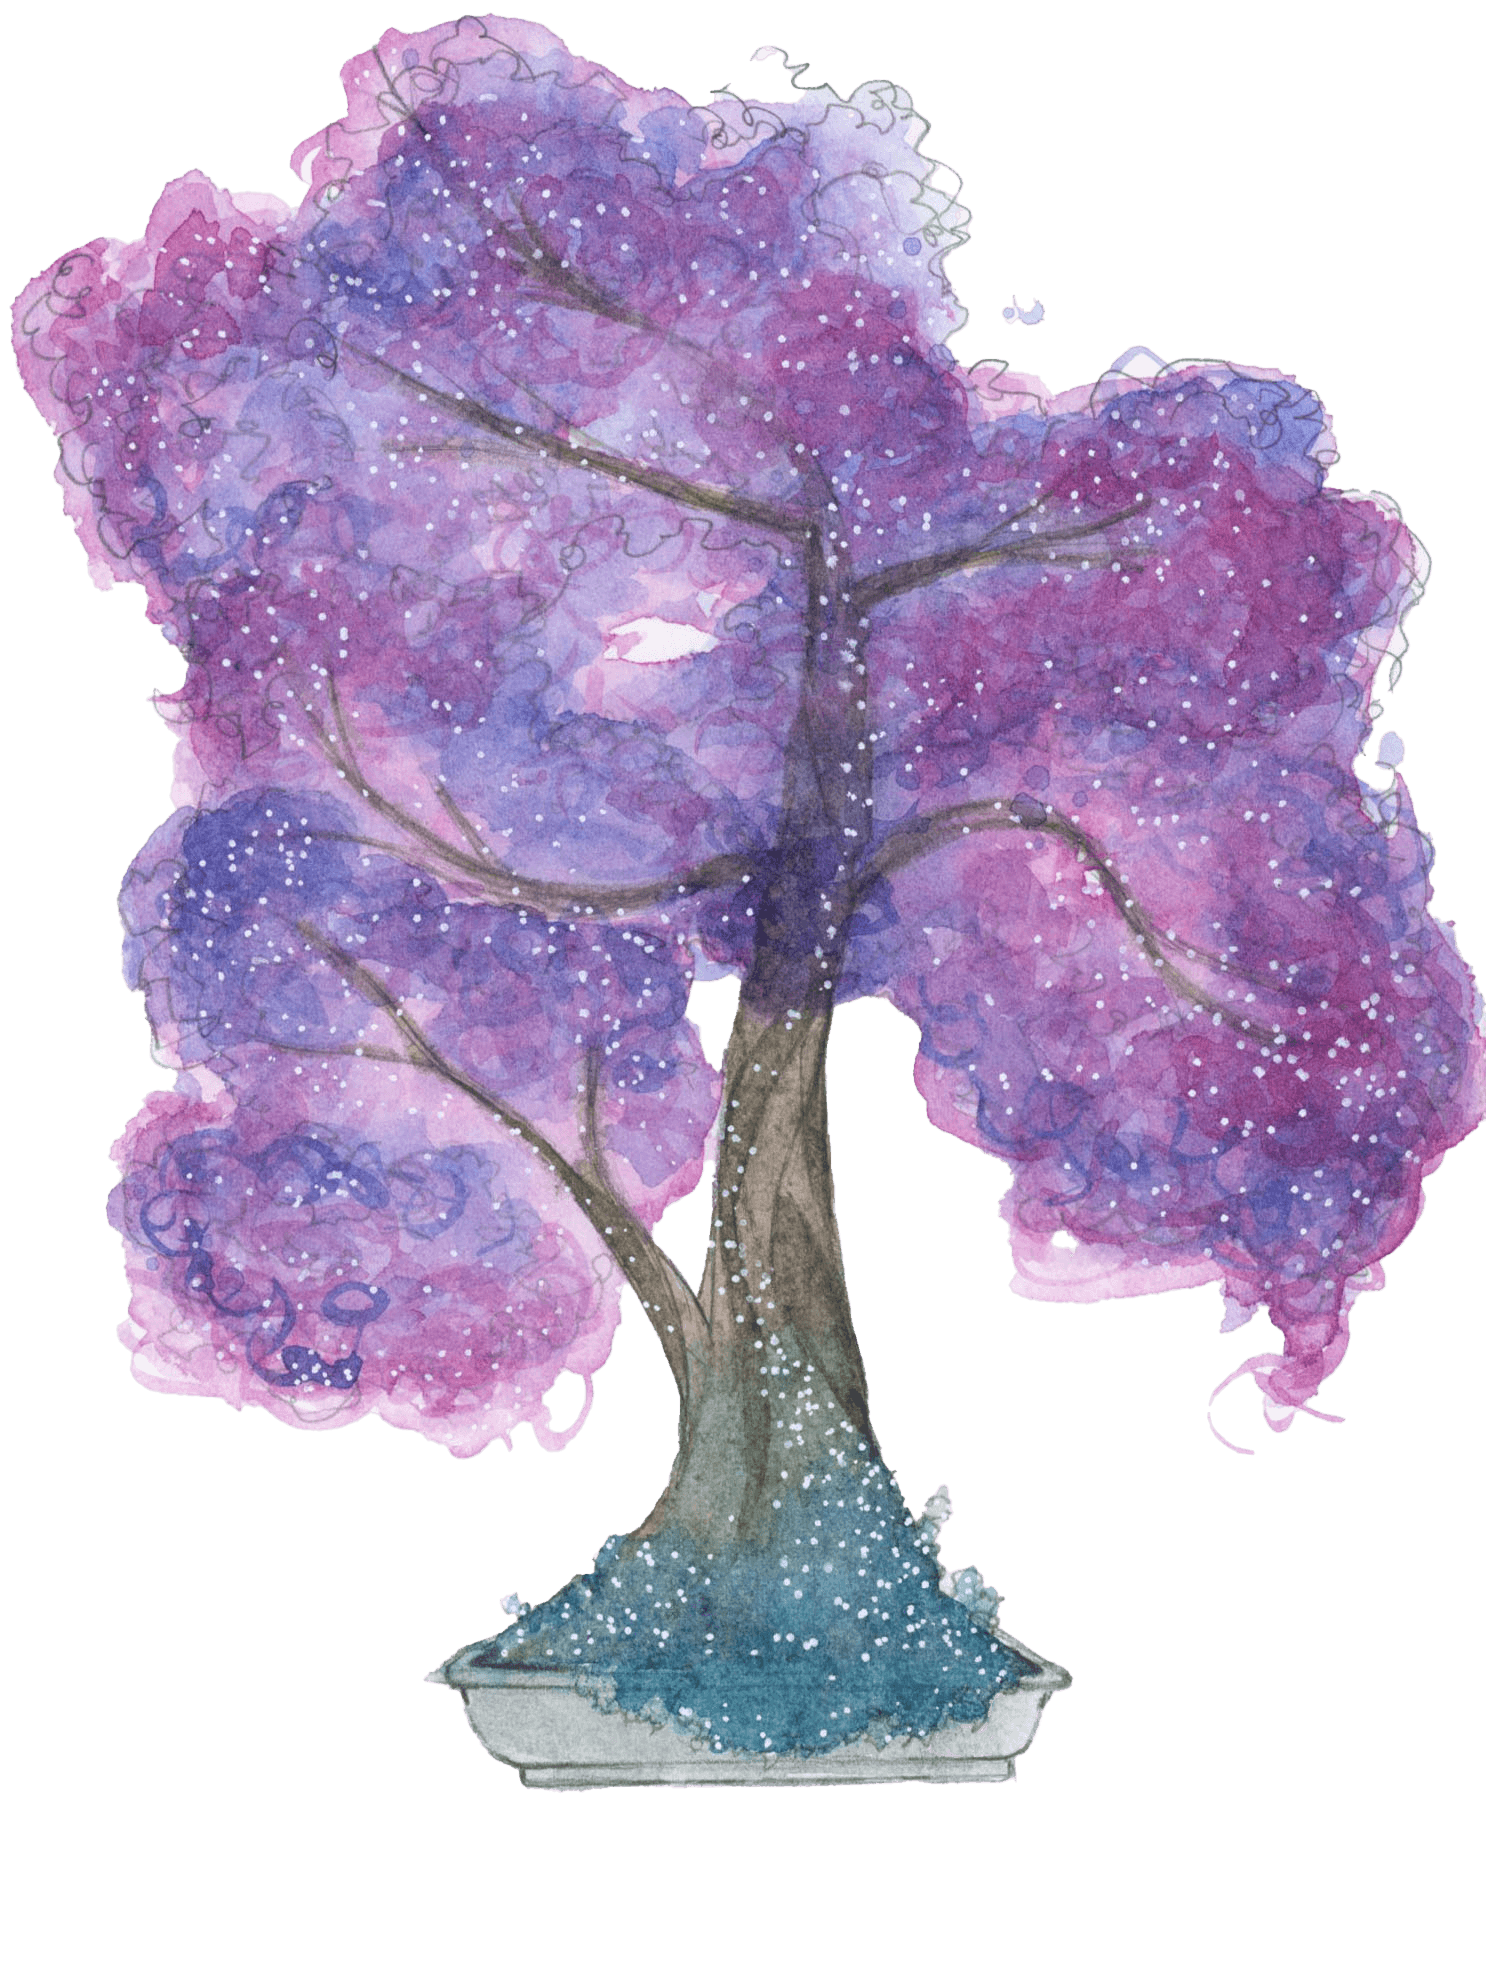 watercolor painting of a bonsai tree with purple blossoms